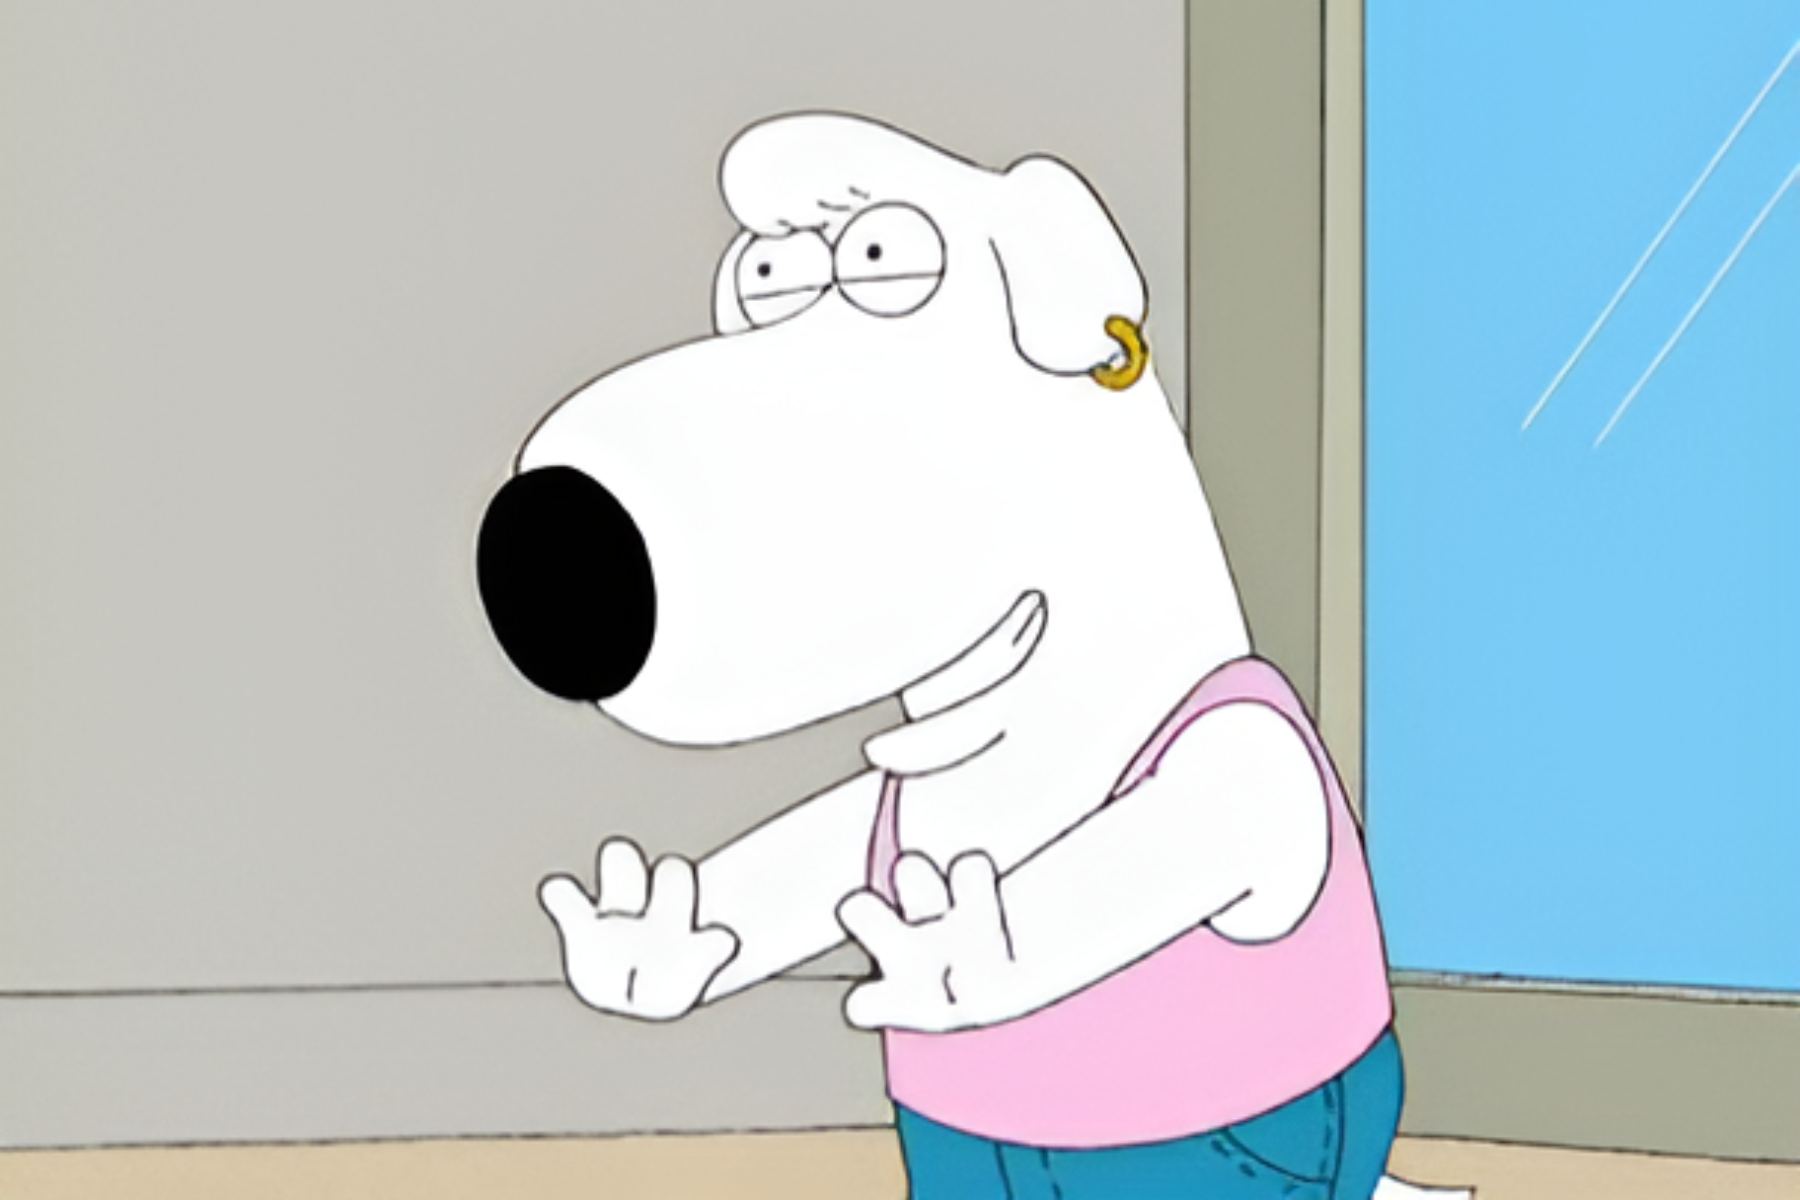 Brian Griffin is standing in a room